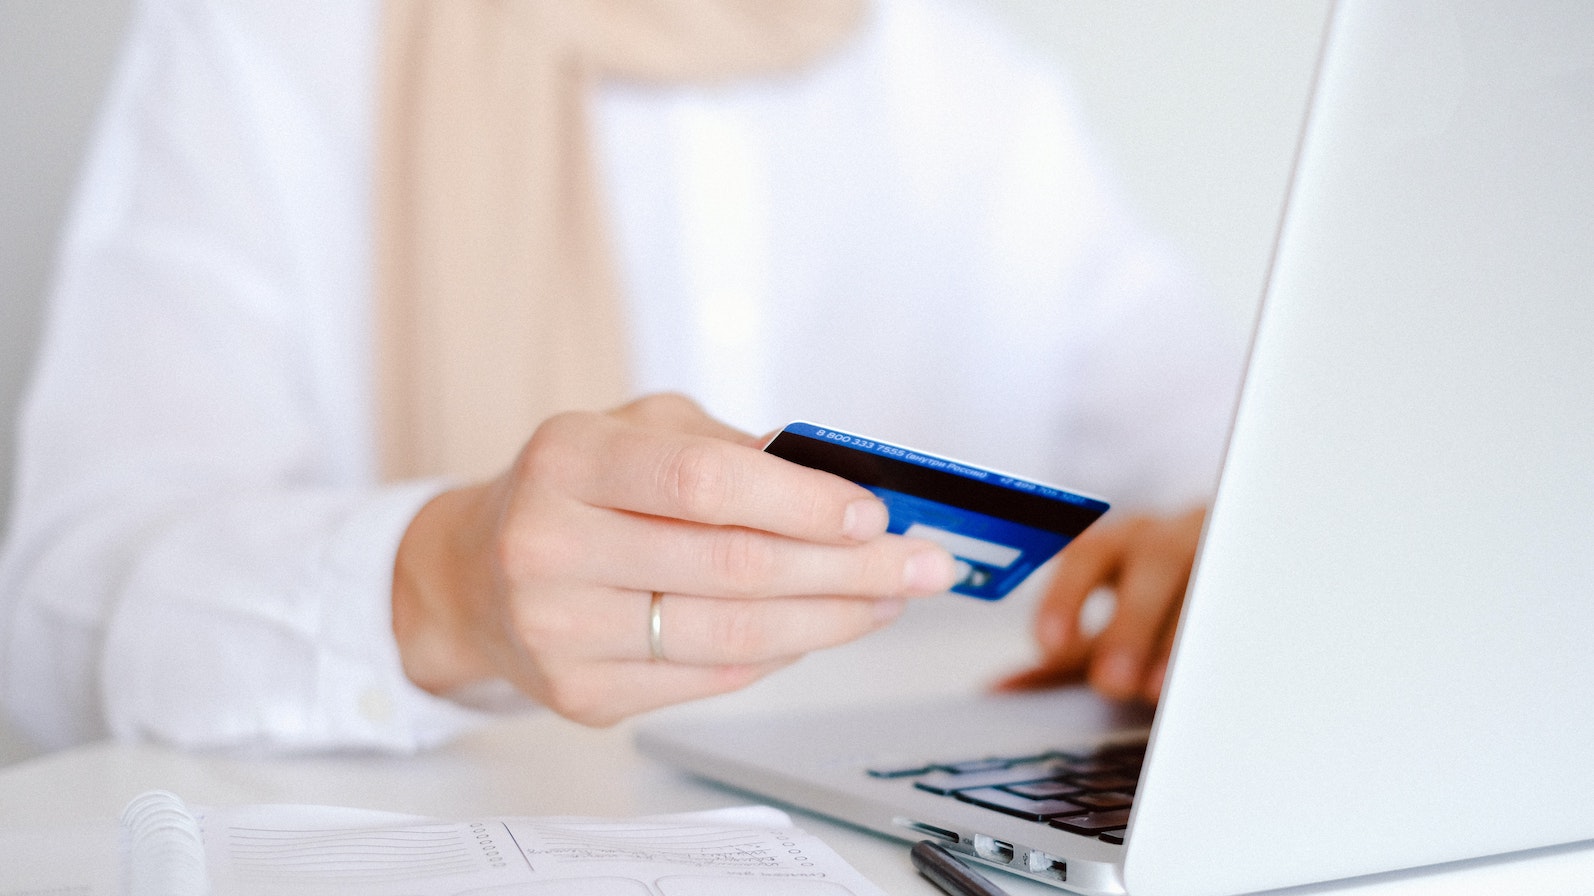 Person wearing a scarf and holding a credit card in front of a laptop